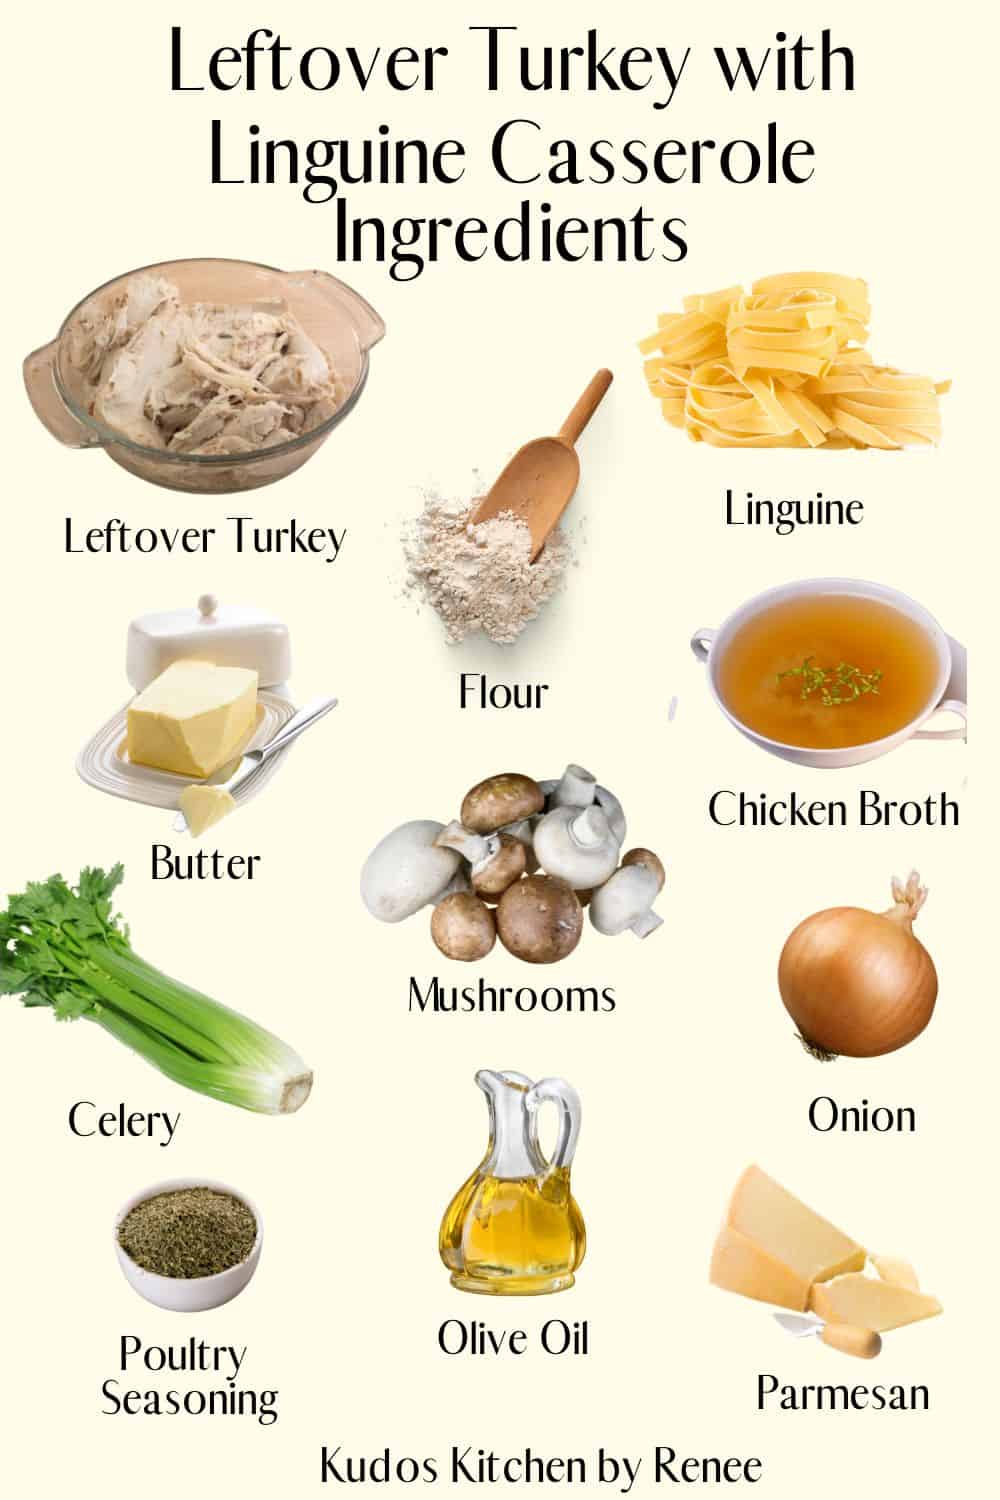 A visual graphic ingredient list for making Leftover Turkey with Linguine Casserole.